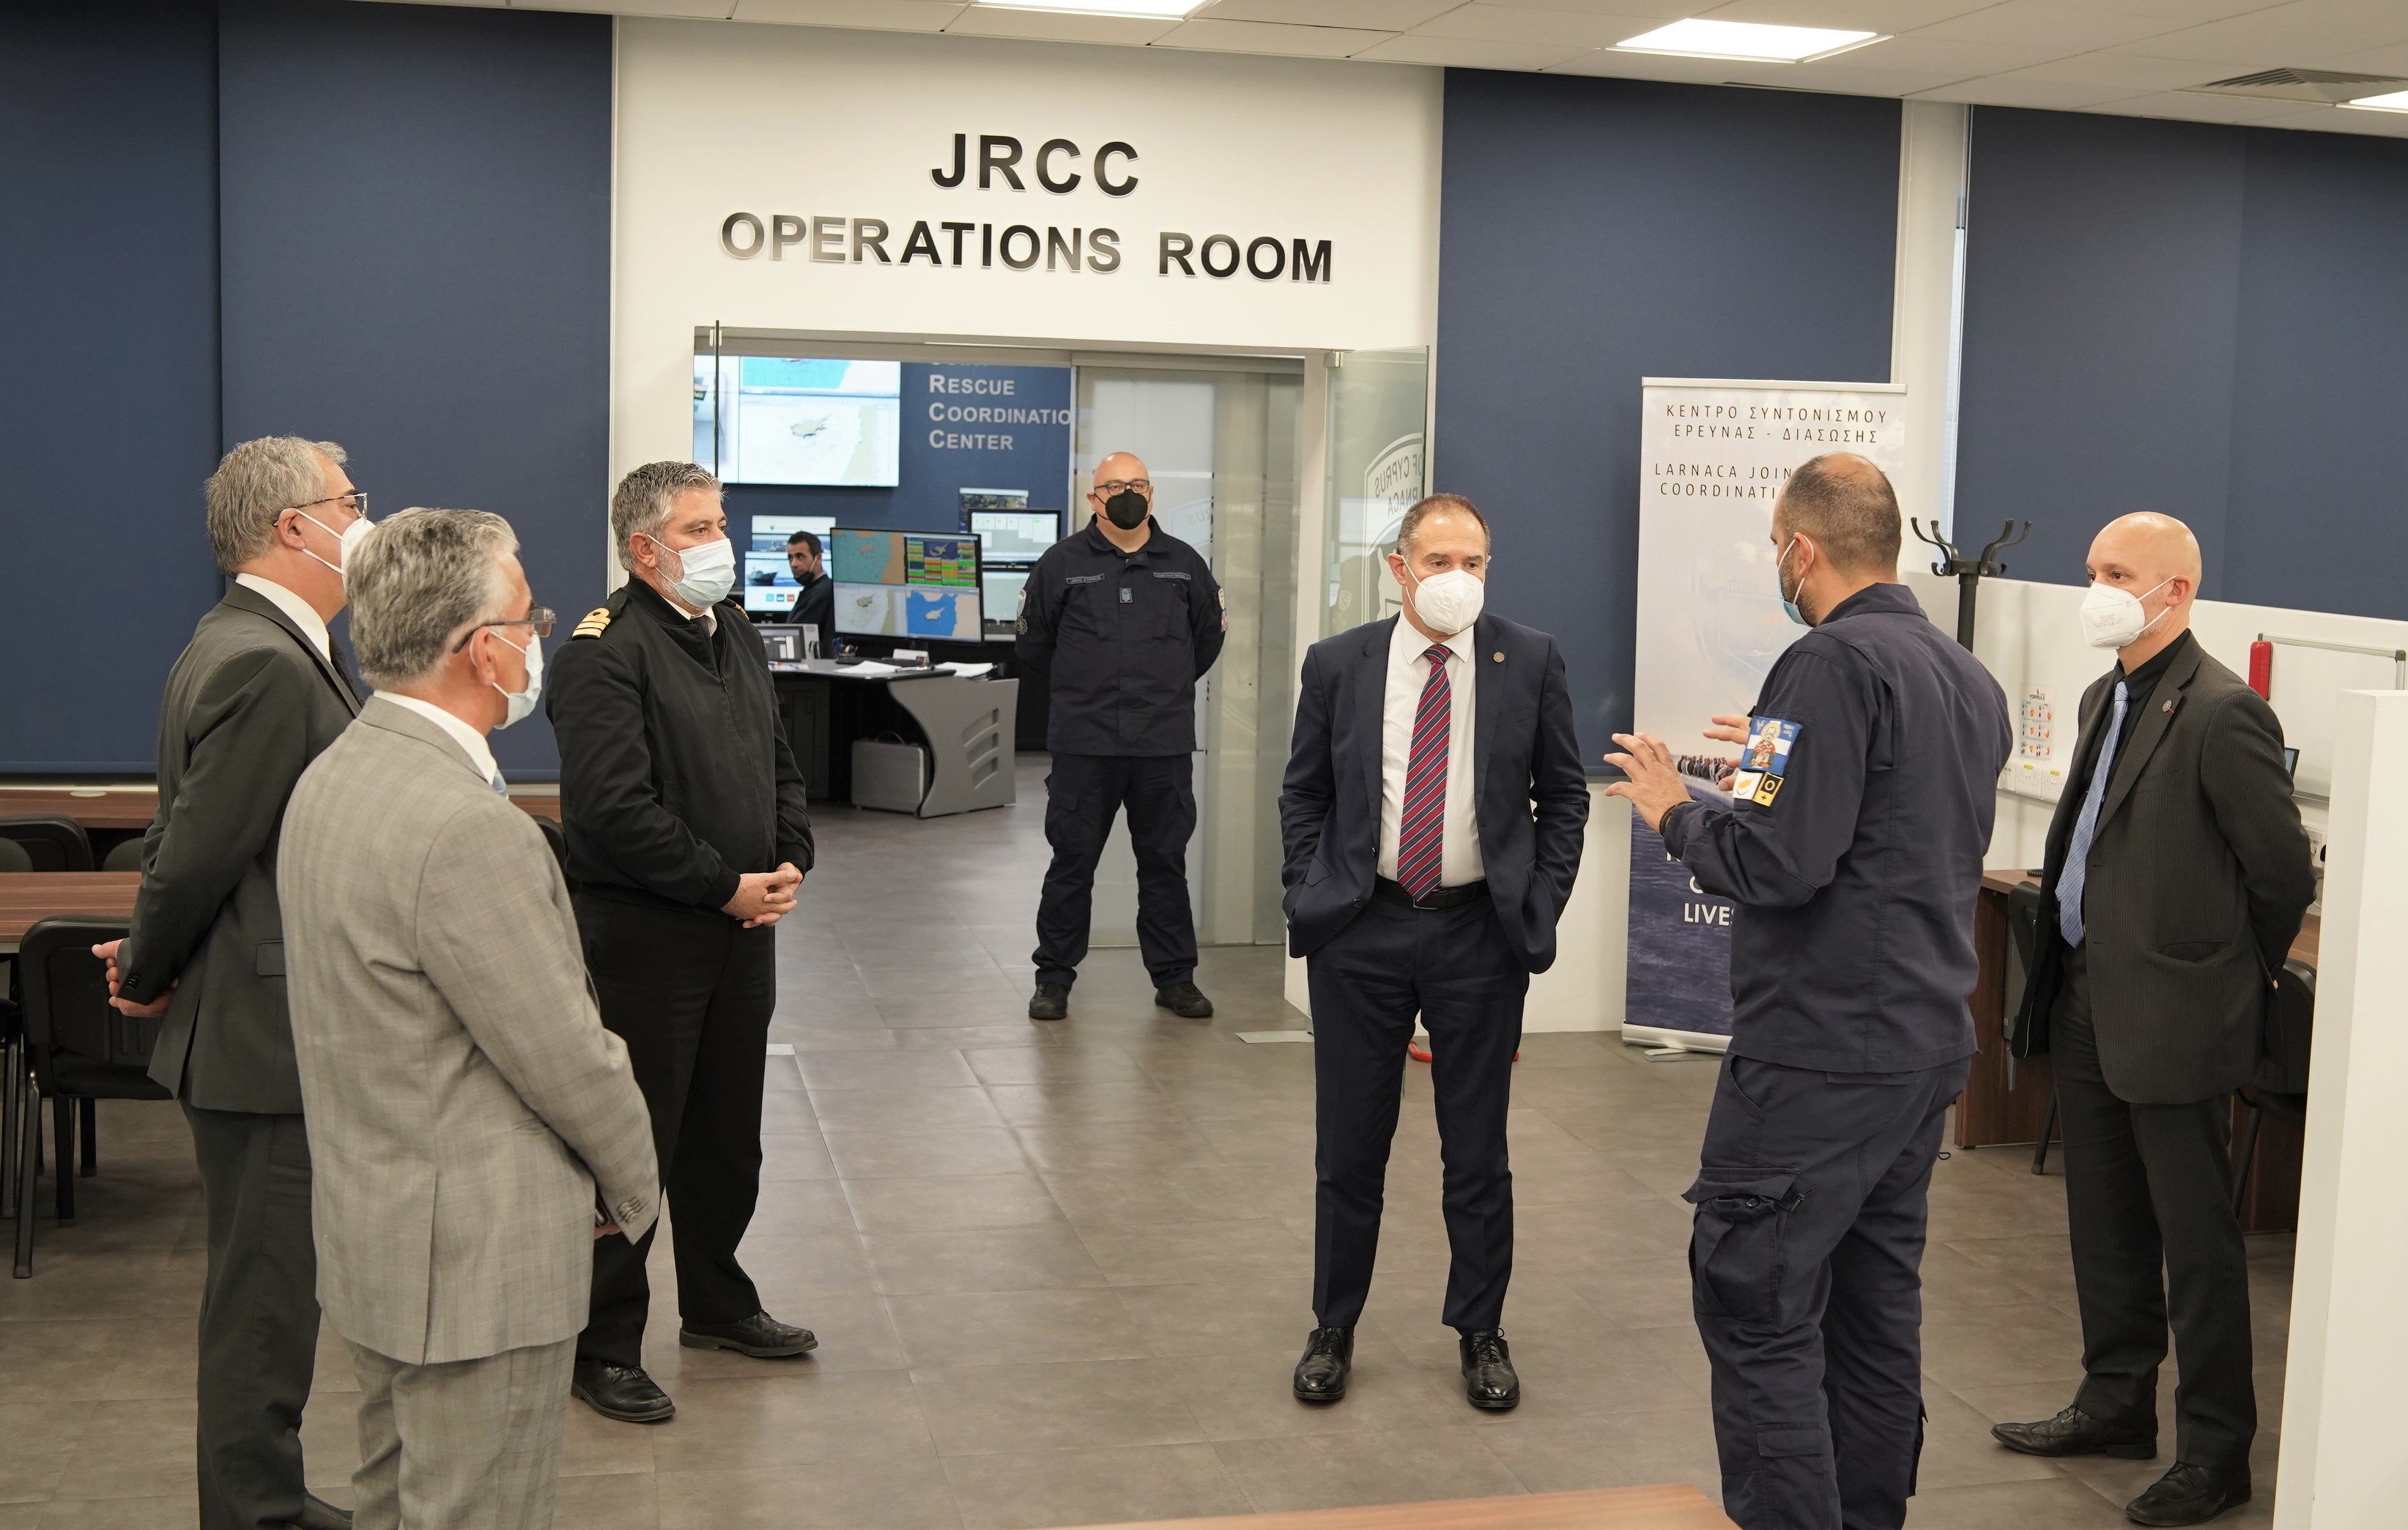 Visit of the Executive Director of the FRONTEX Agency to JRCC